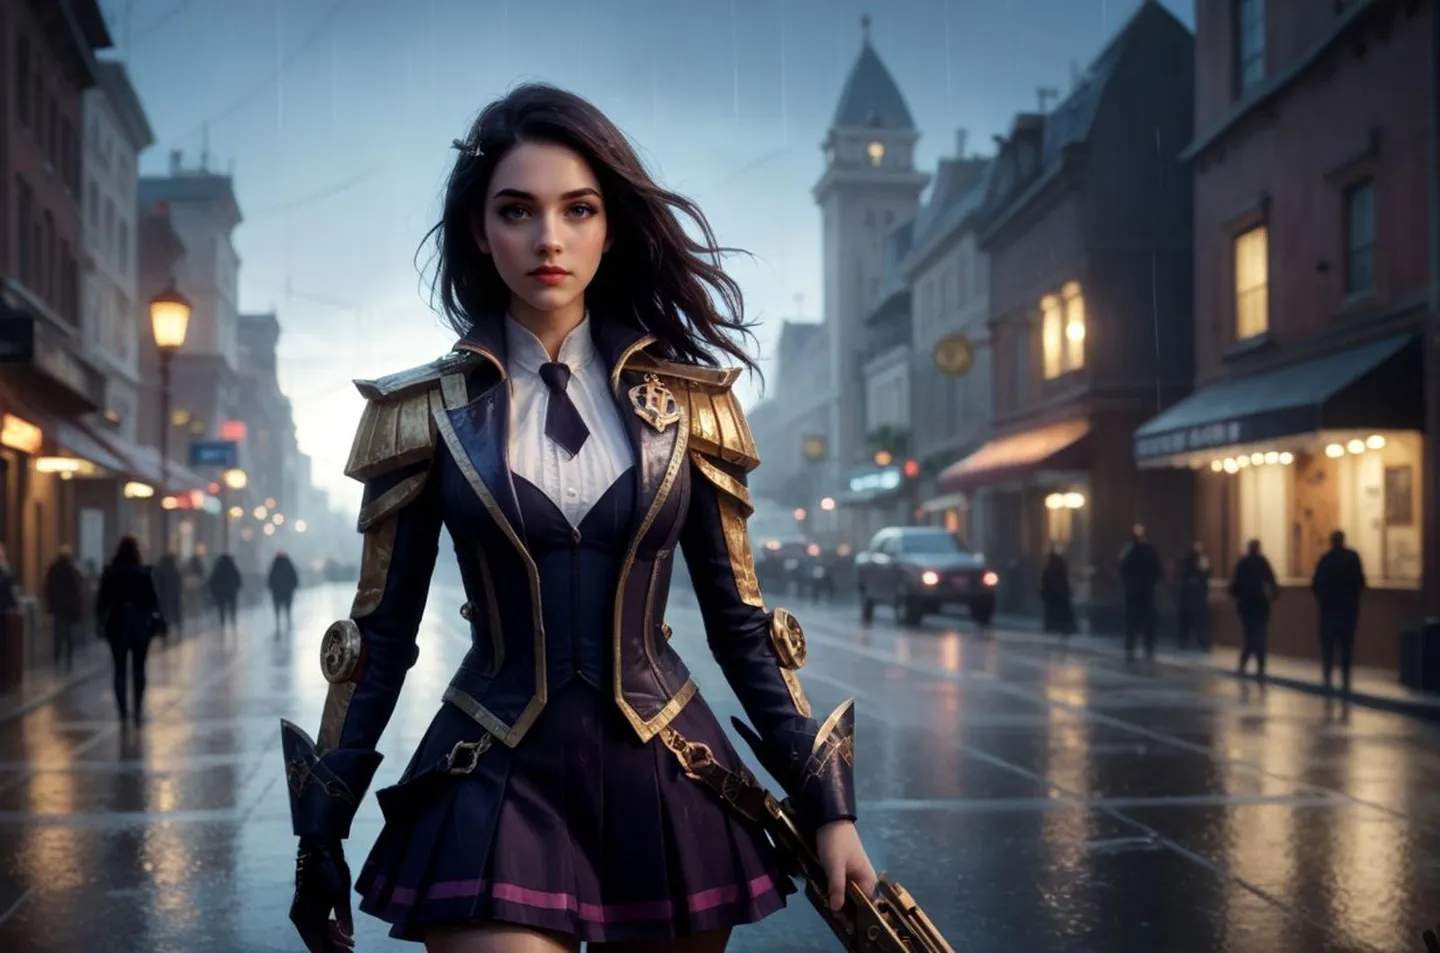 AI-generated image using Stable Diffusion of a steampunk warrior in detailed armor and holding a weapon, set against a backdrop of a rainy, lamp-lit fantasy city street at dusk with blurred buildings and pedestrians.